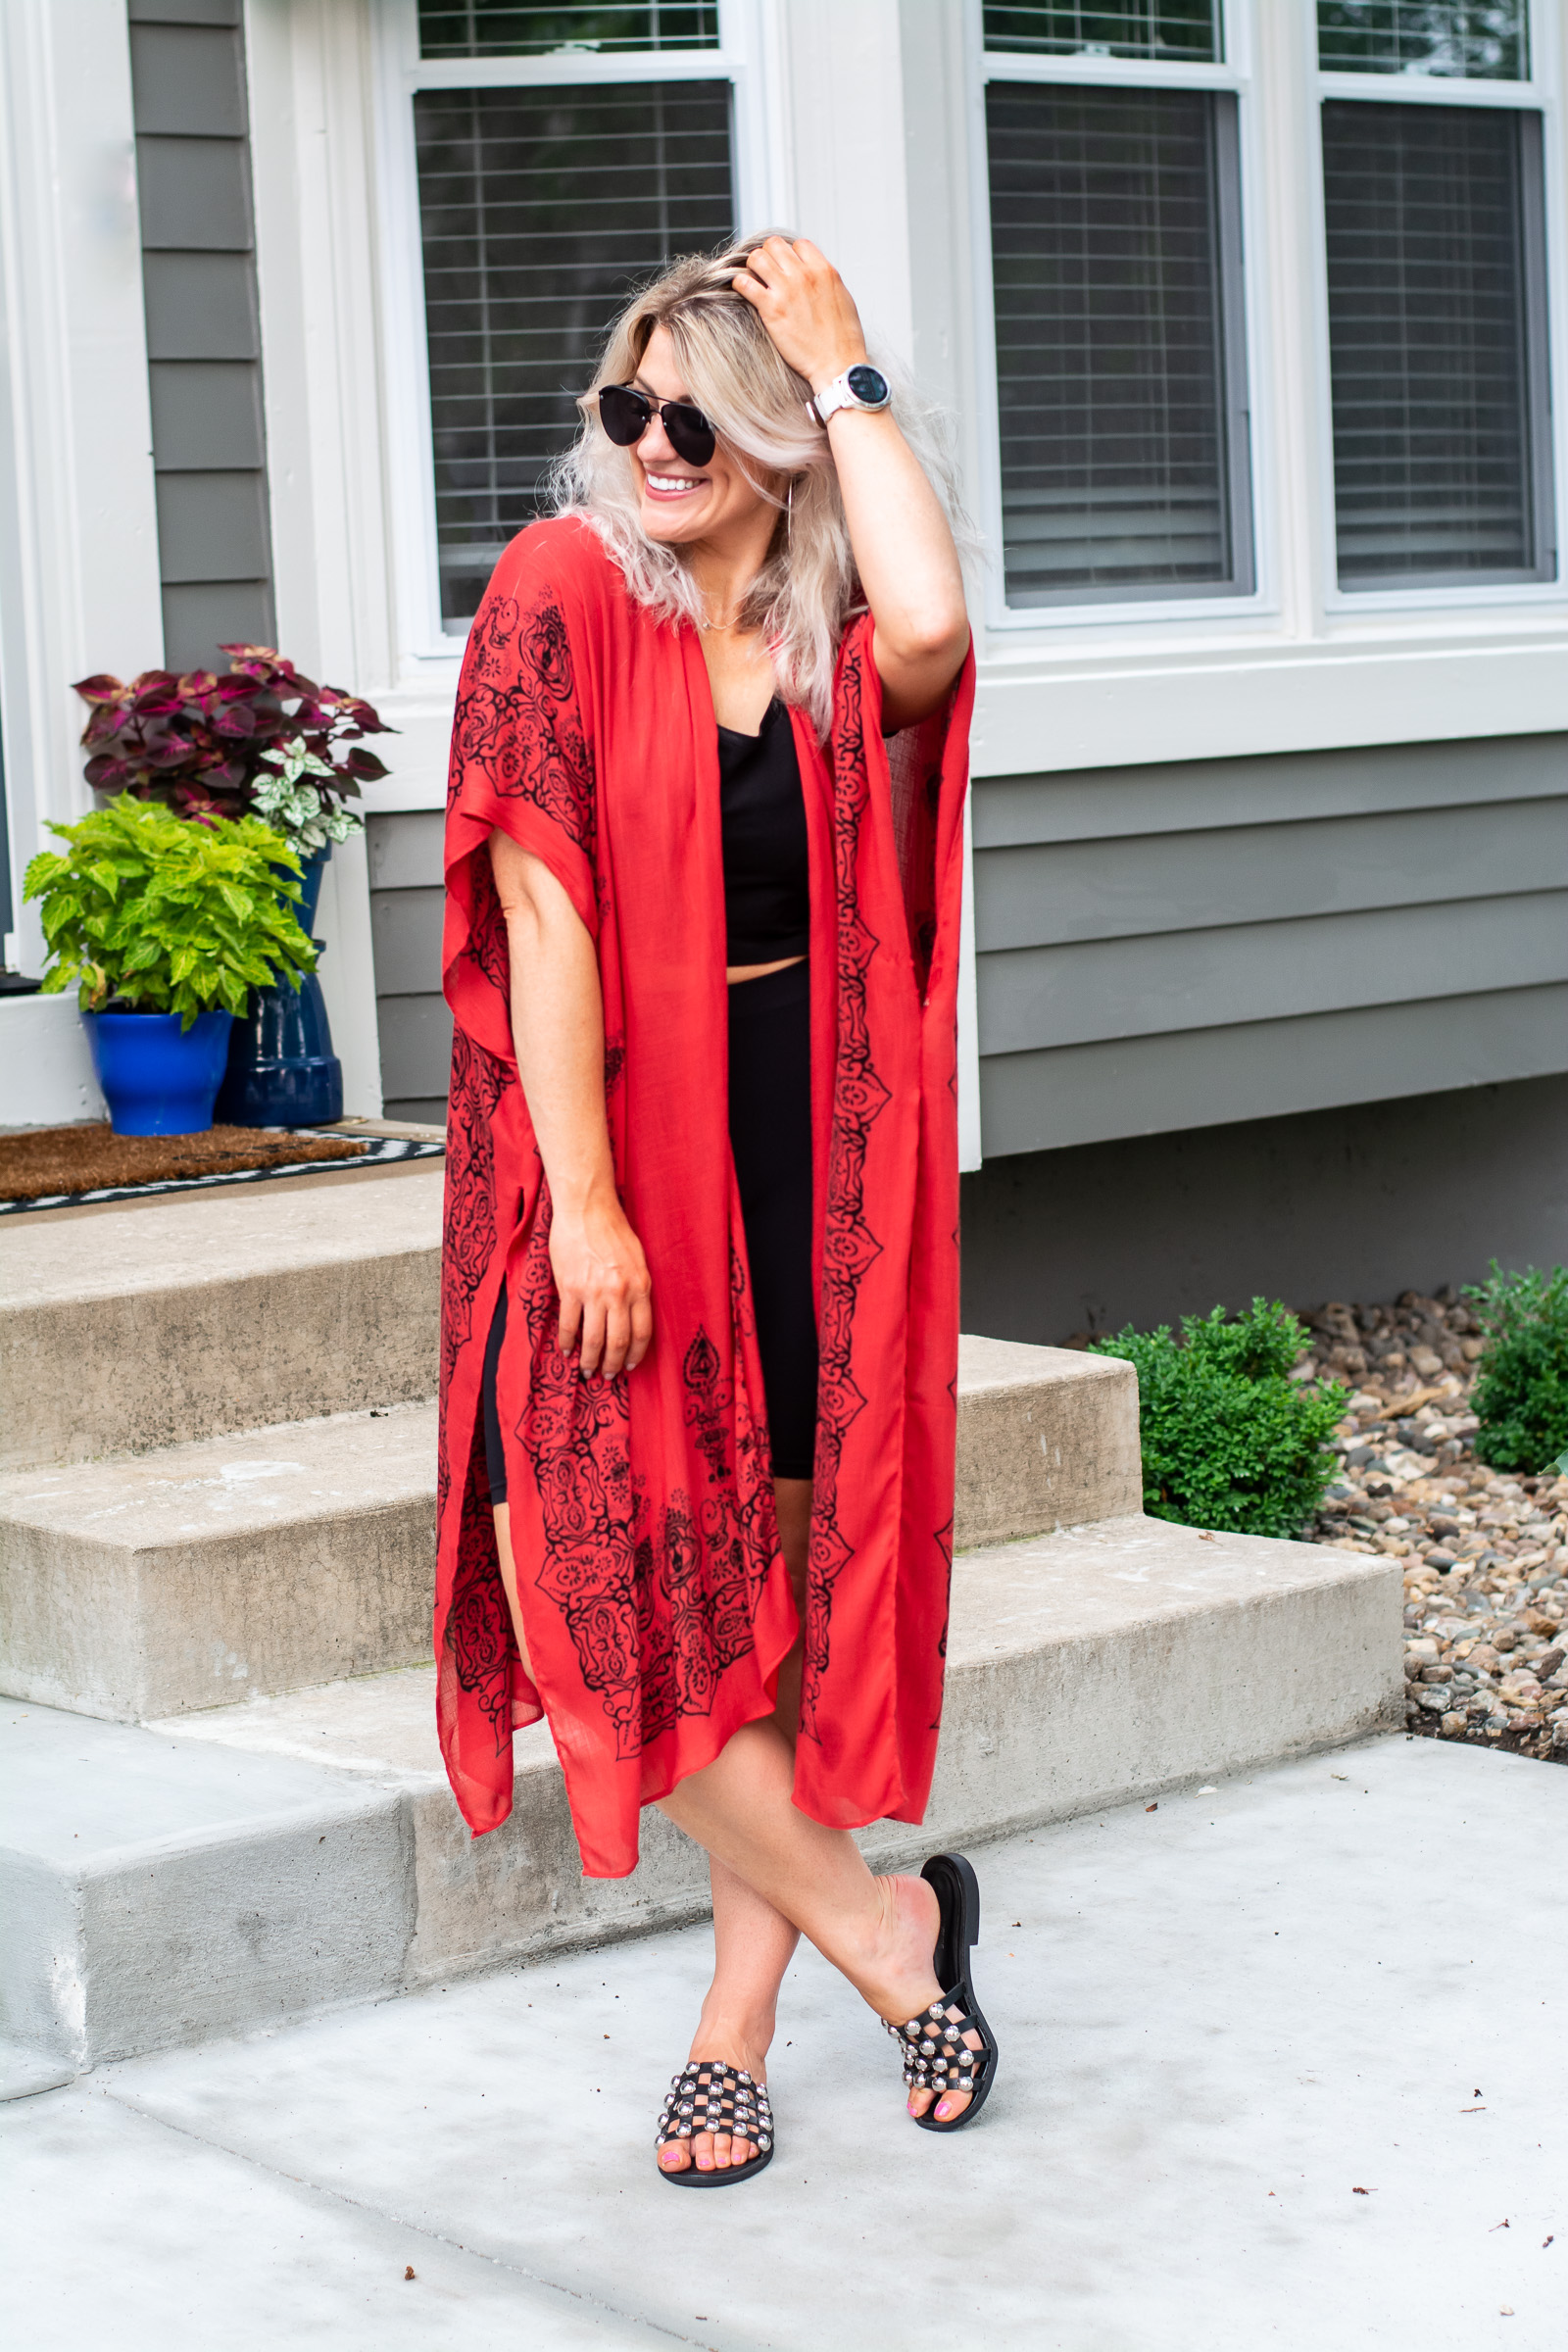 Red Printed Kimono + Cage Sandals. | Ash from LSR